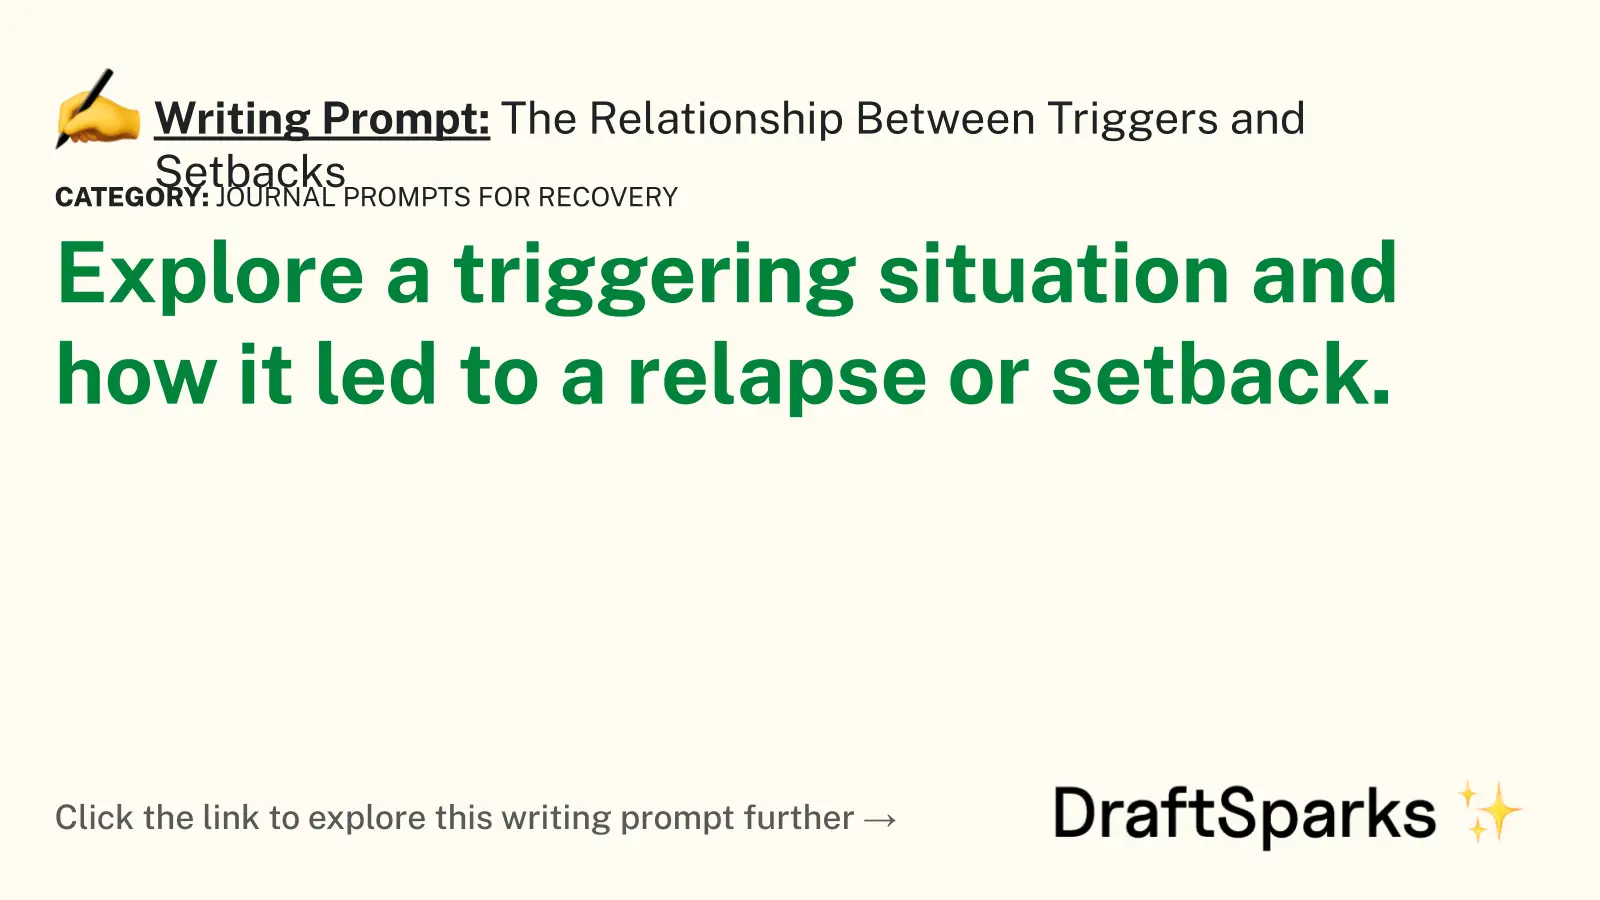 The Relationship Between Triggers and Setbacks